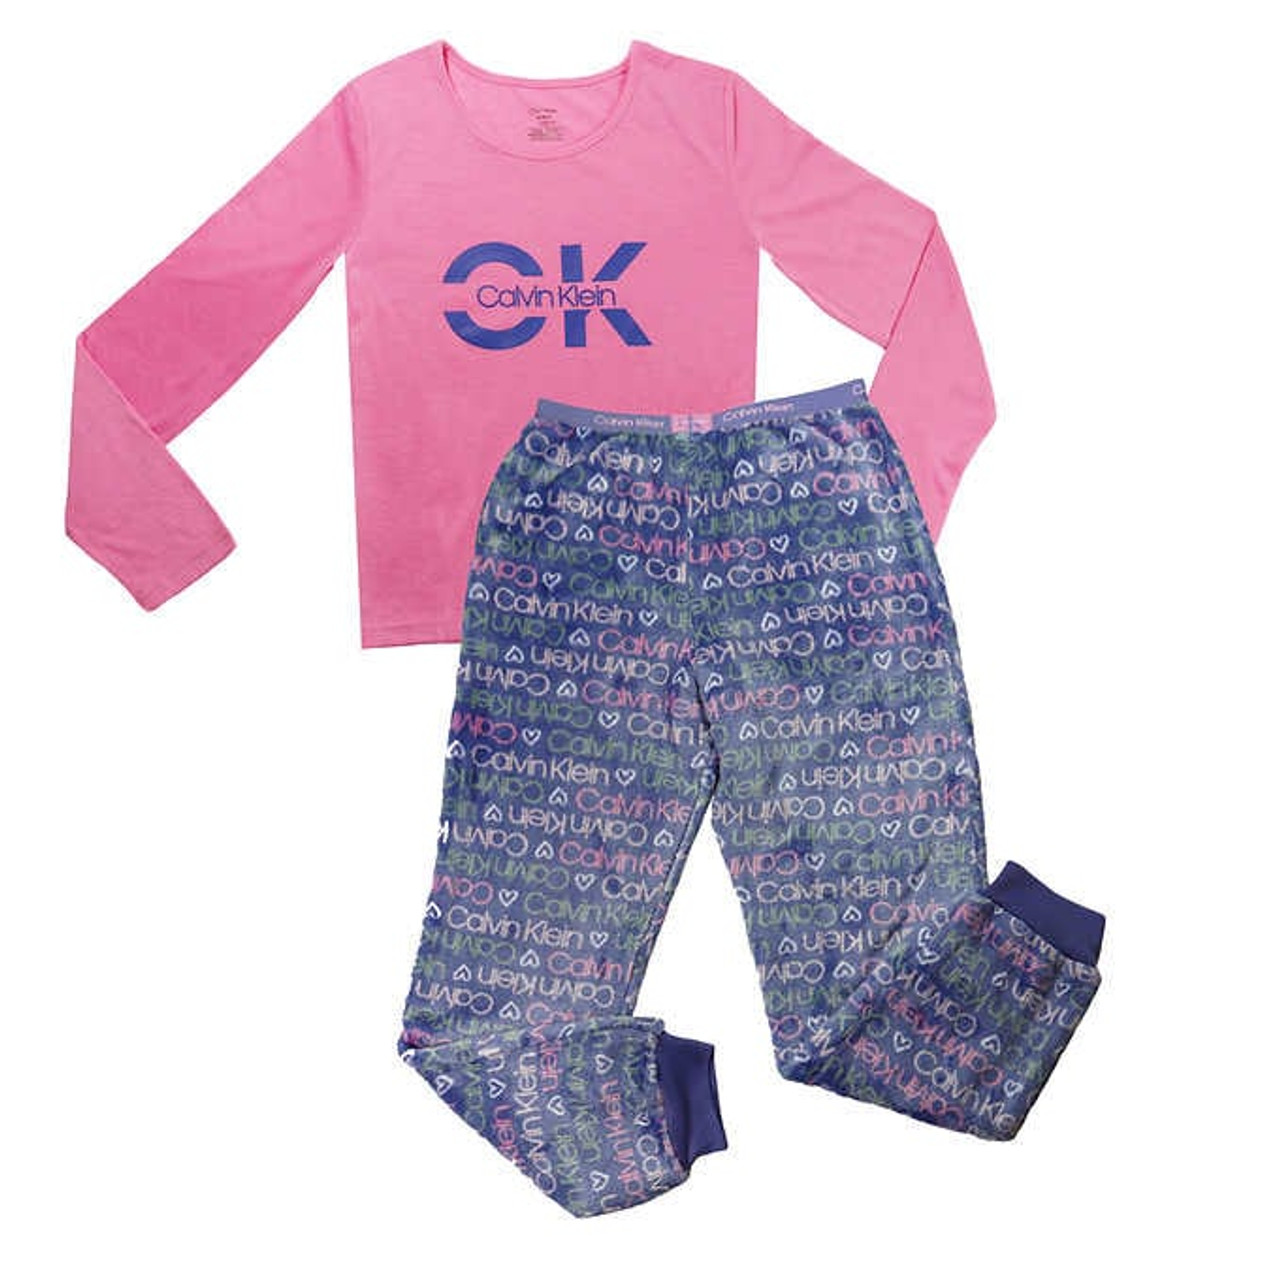 20 Units of Calvin Klein 2 Piece Cozy PJ Set - Pink - Small (6) - MSRP 400$  - Brand New (Lot # CP567308)